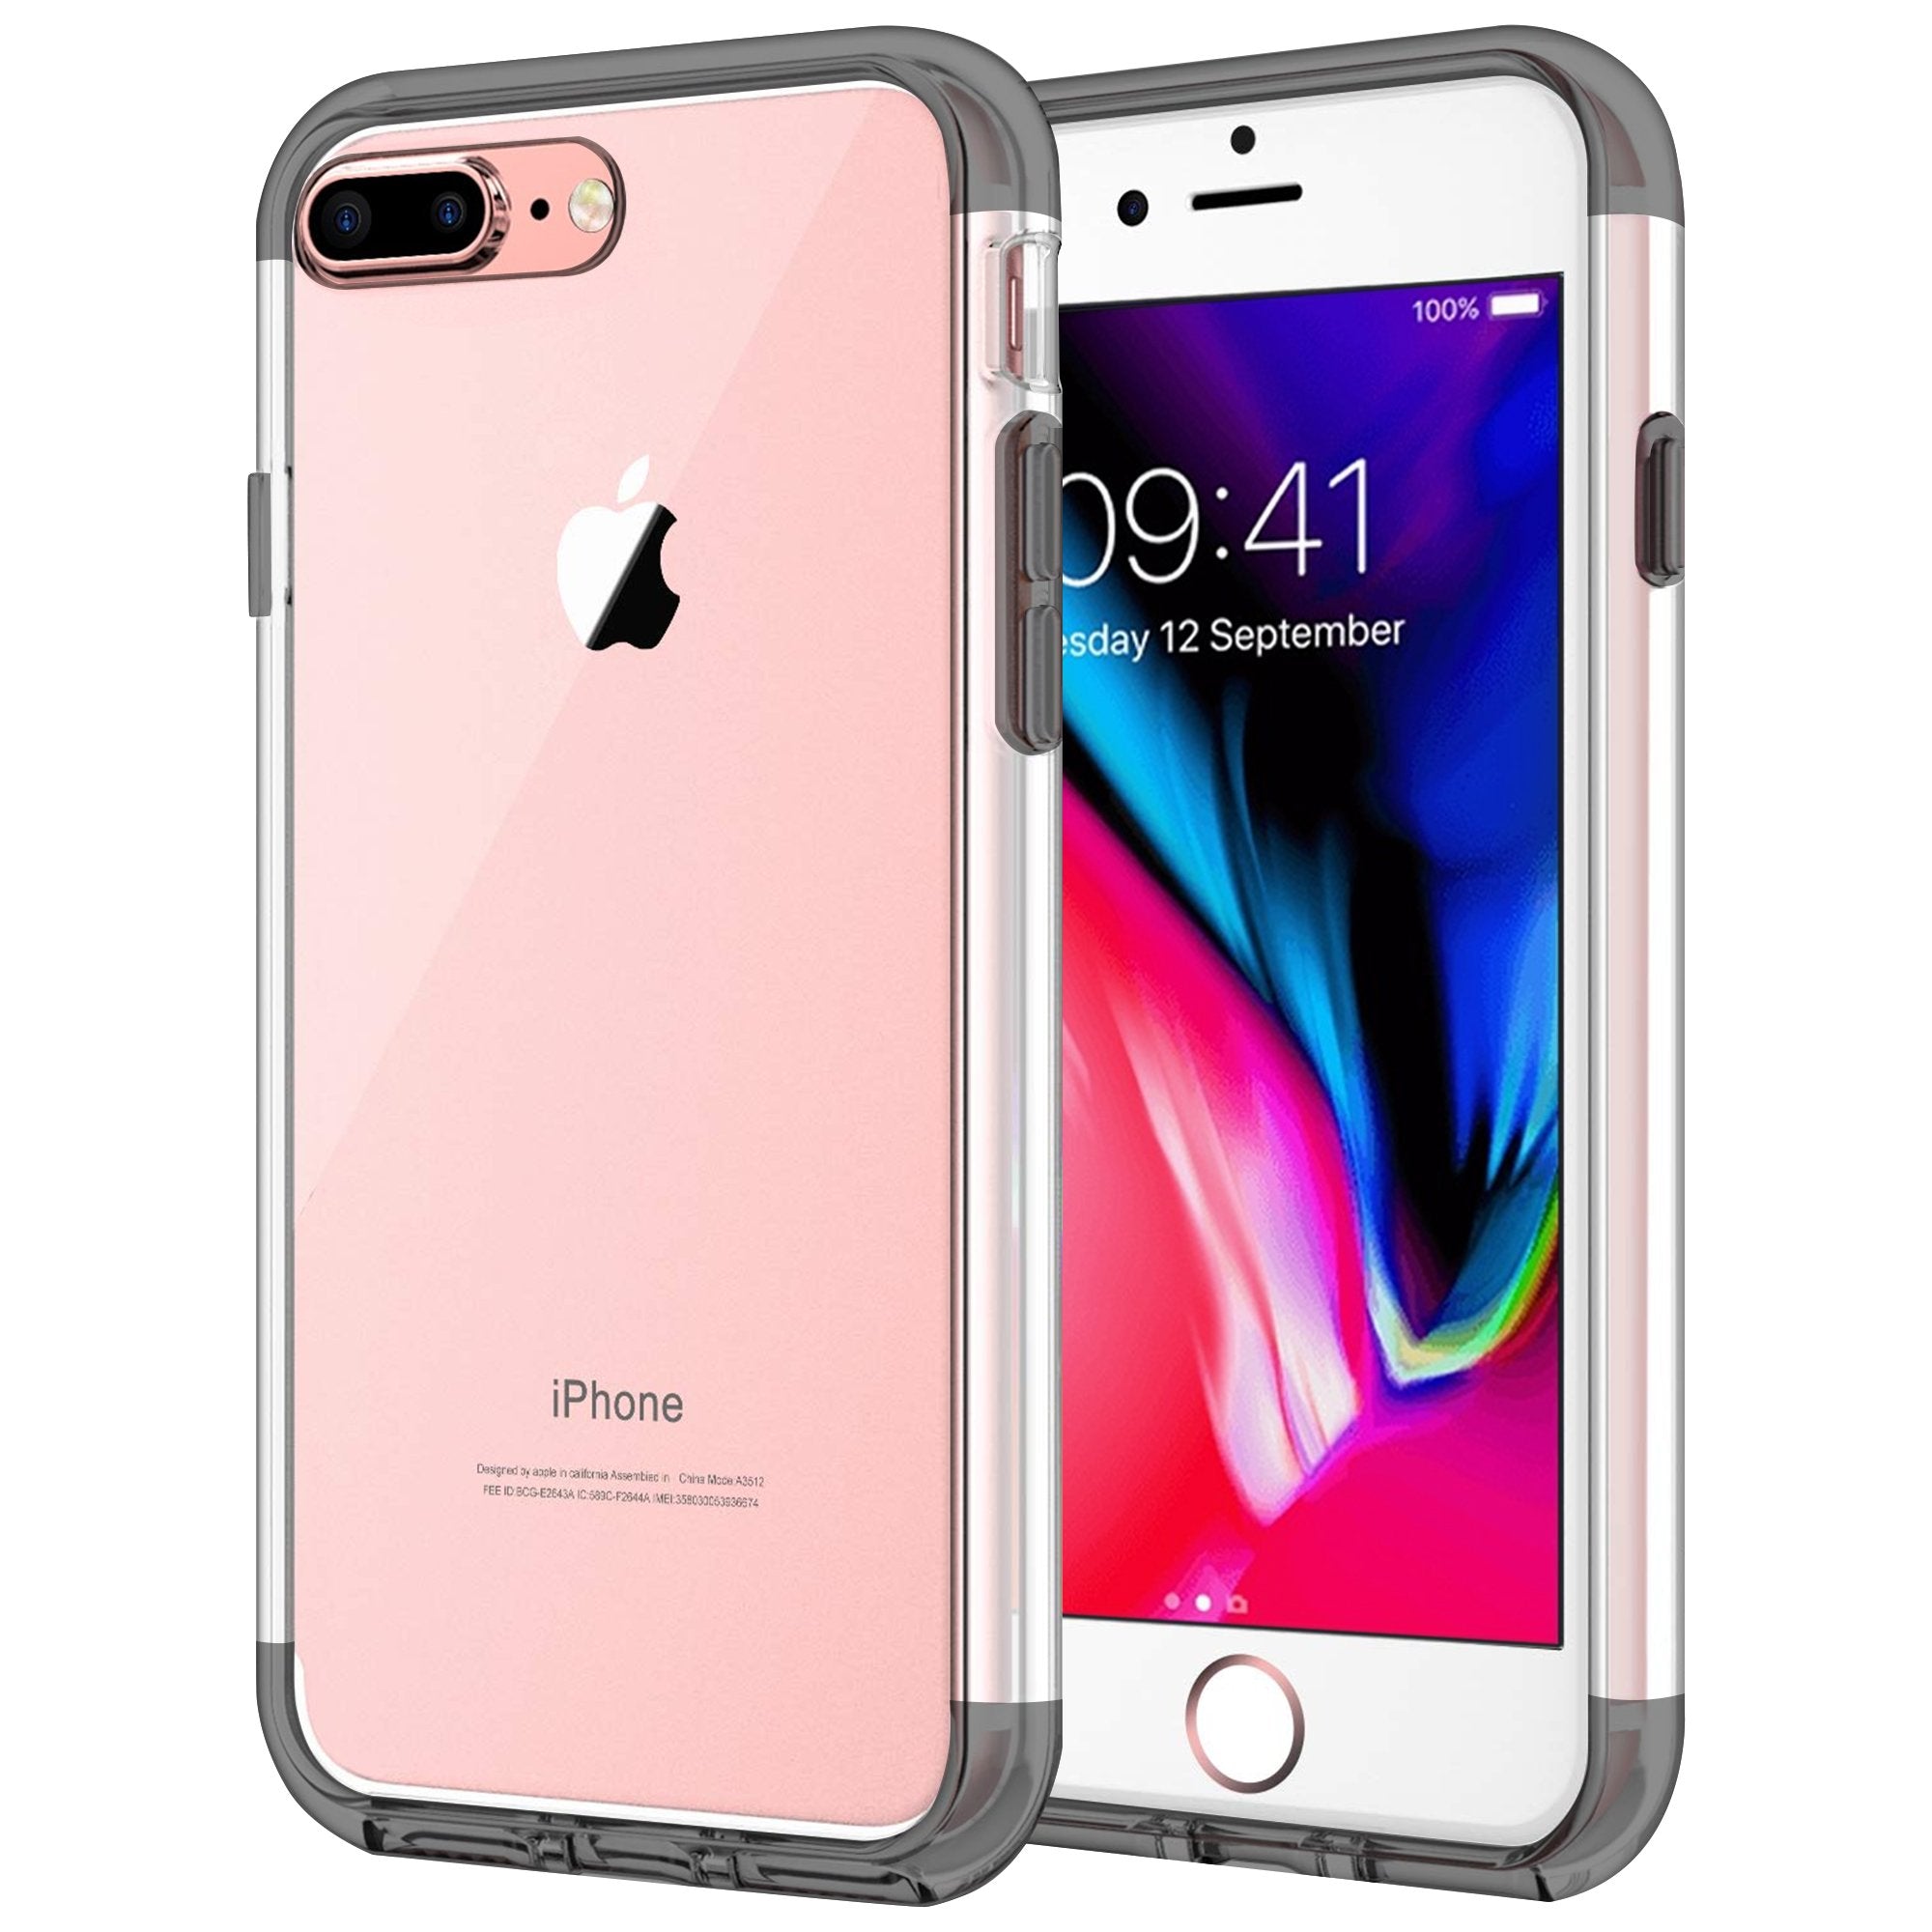 Case for iPhone 7 Plus Shock Proof Soft TPU Silicone Phone Clear Slim Cover